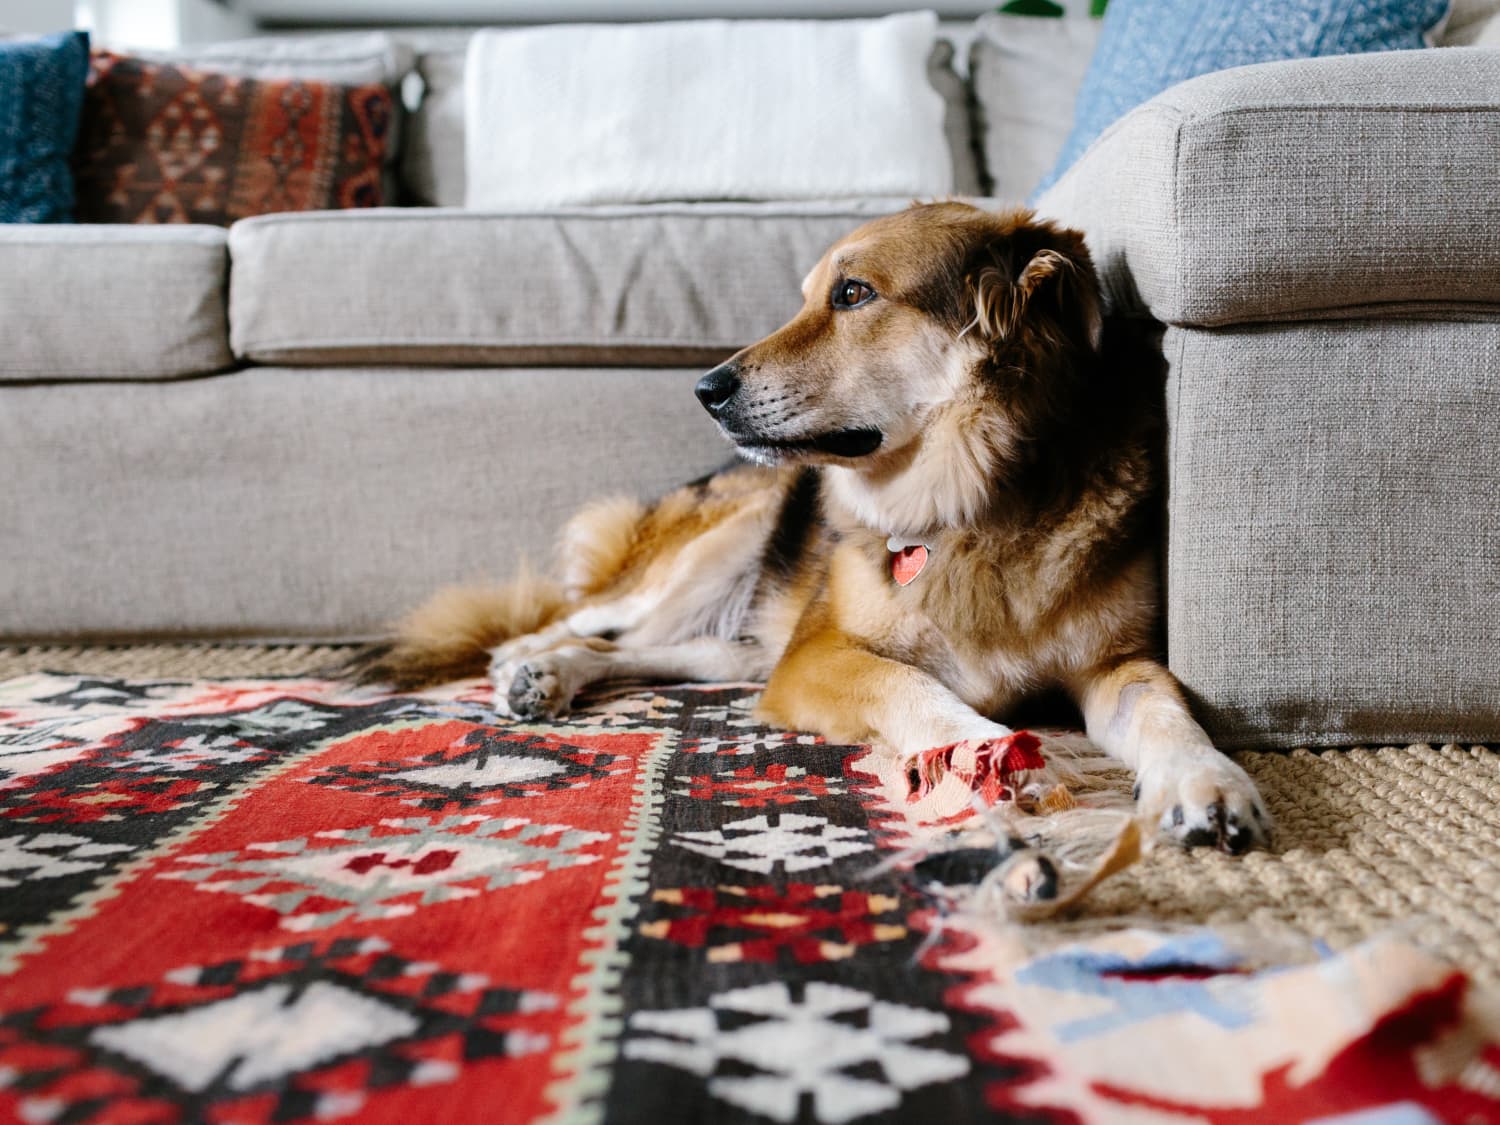 7 ways to keep your rugs clean when you have pets